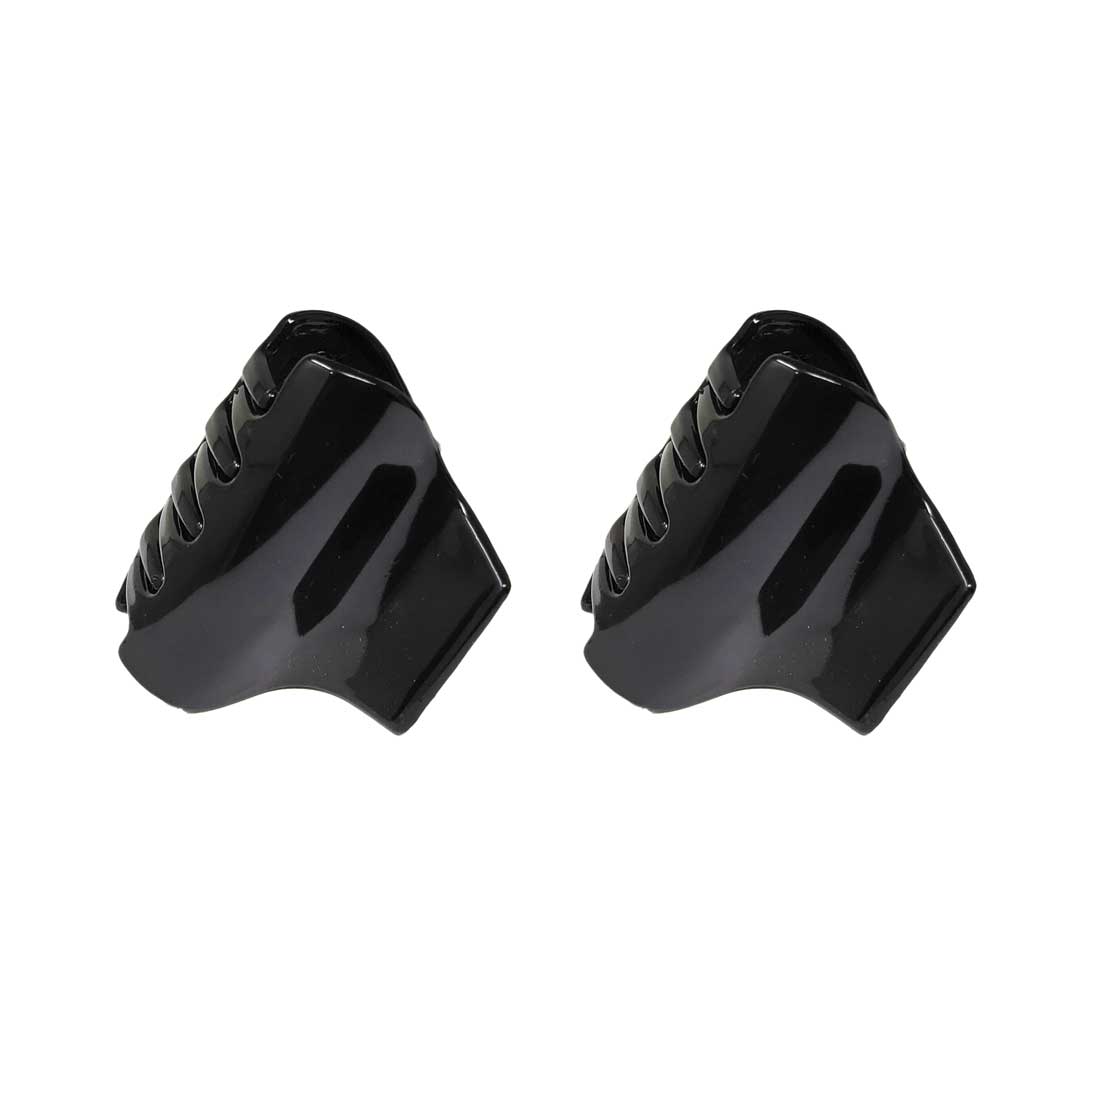 Anokhi Ada Plastic Hair Clutcher/Hair Claw Clip for Girls and Women (Black, Pack of 2) - 01-10C